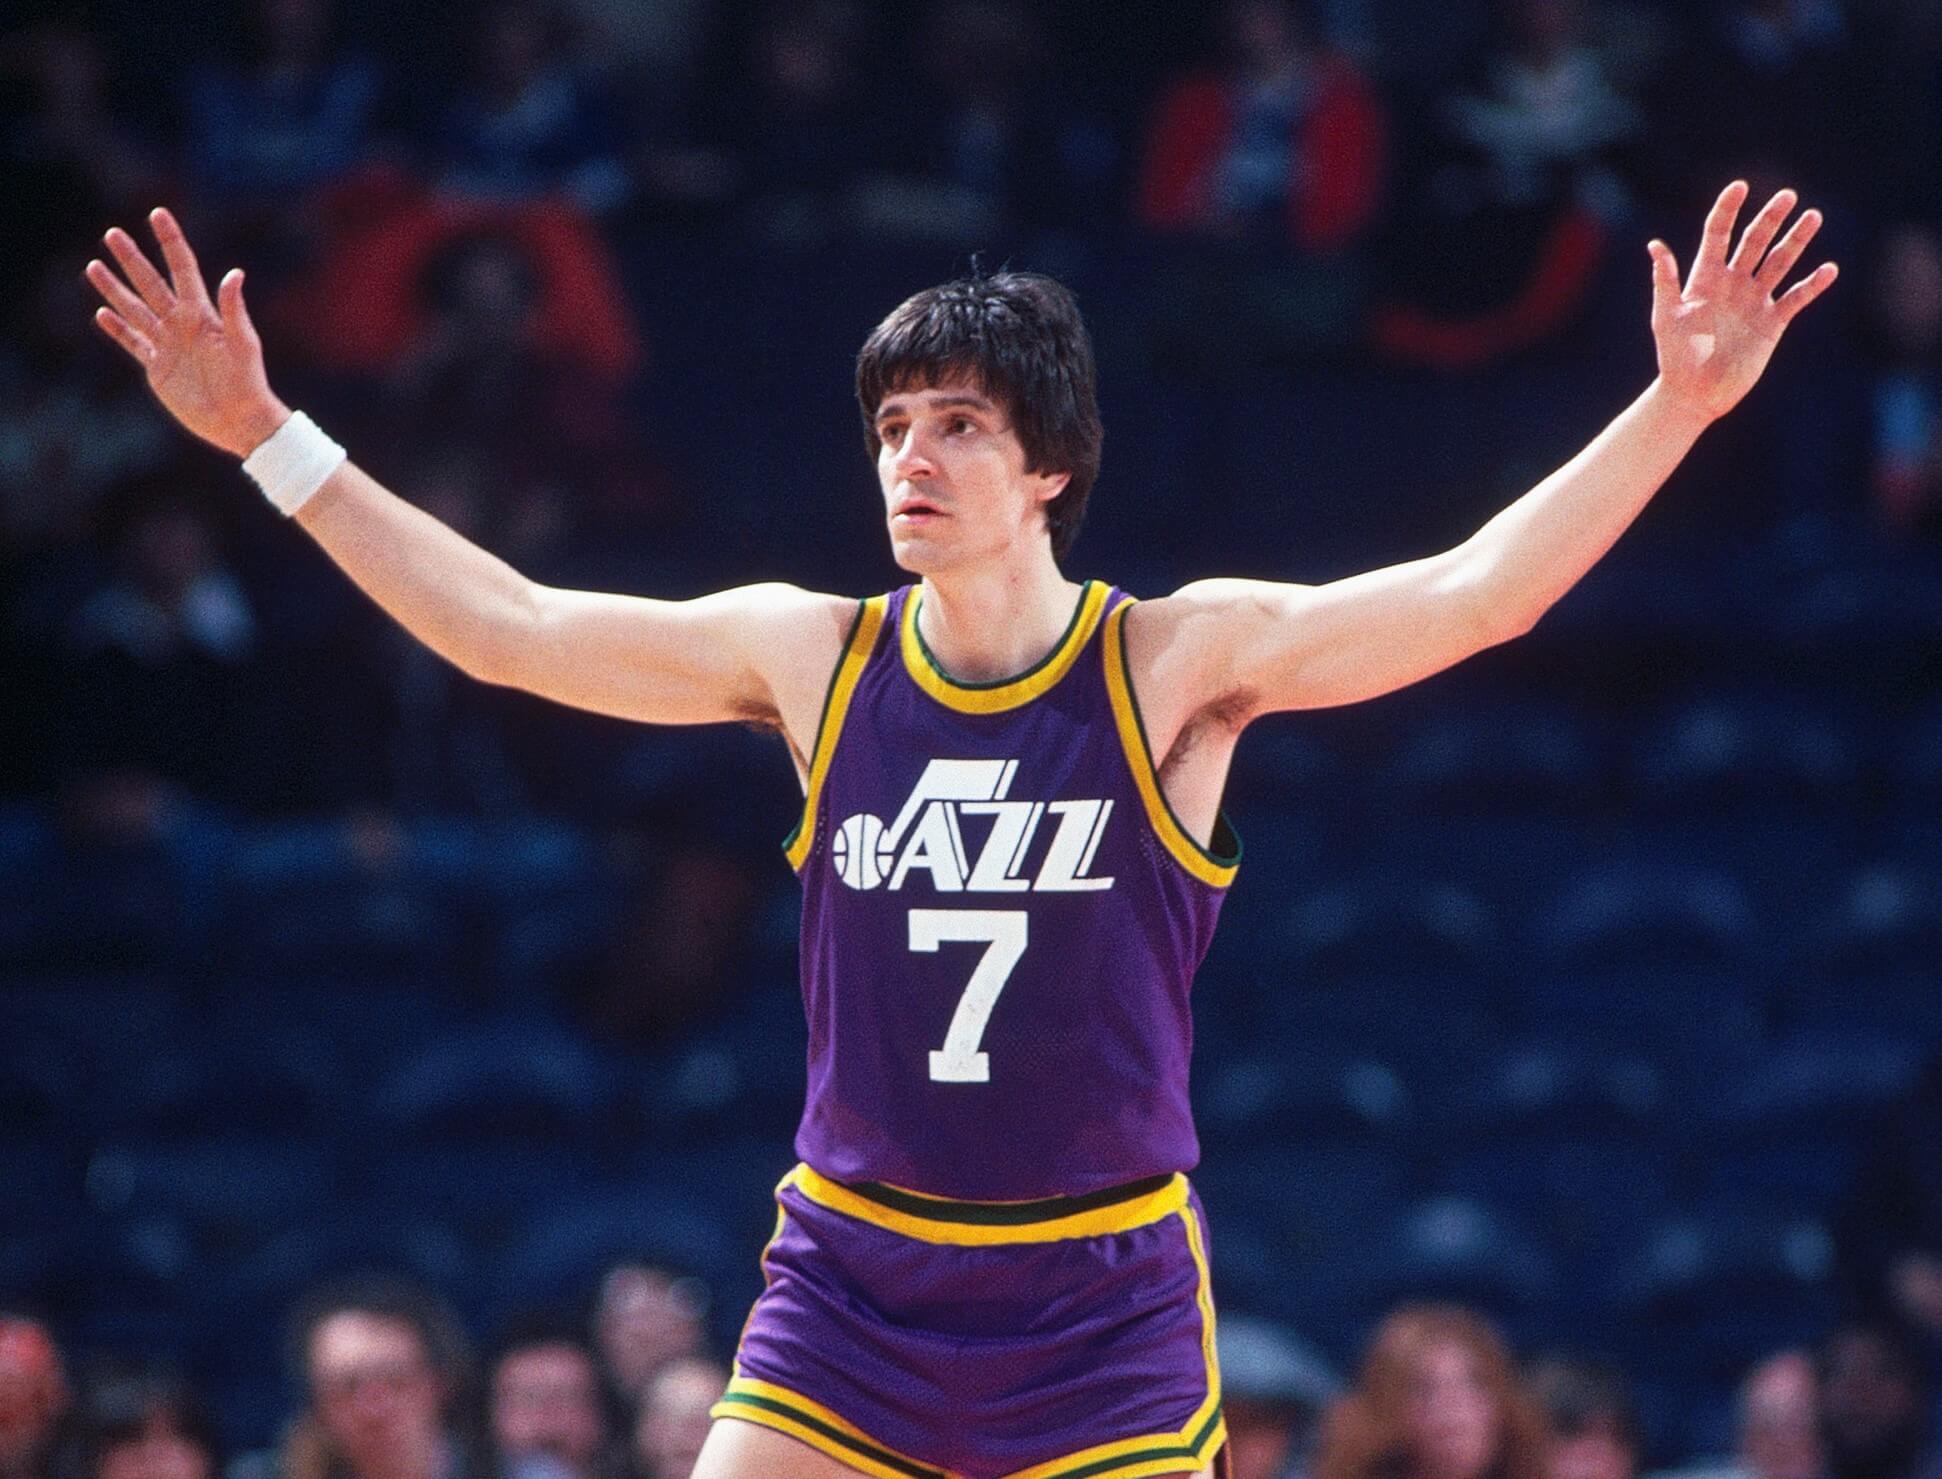 Just How Good Was Pete Maravich? Former NBA Stars Tell Their ‘Pistol Pete’ Stories